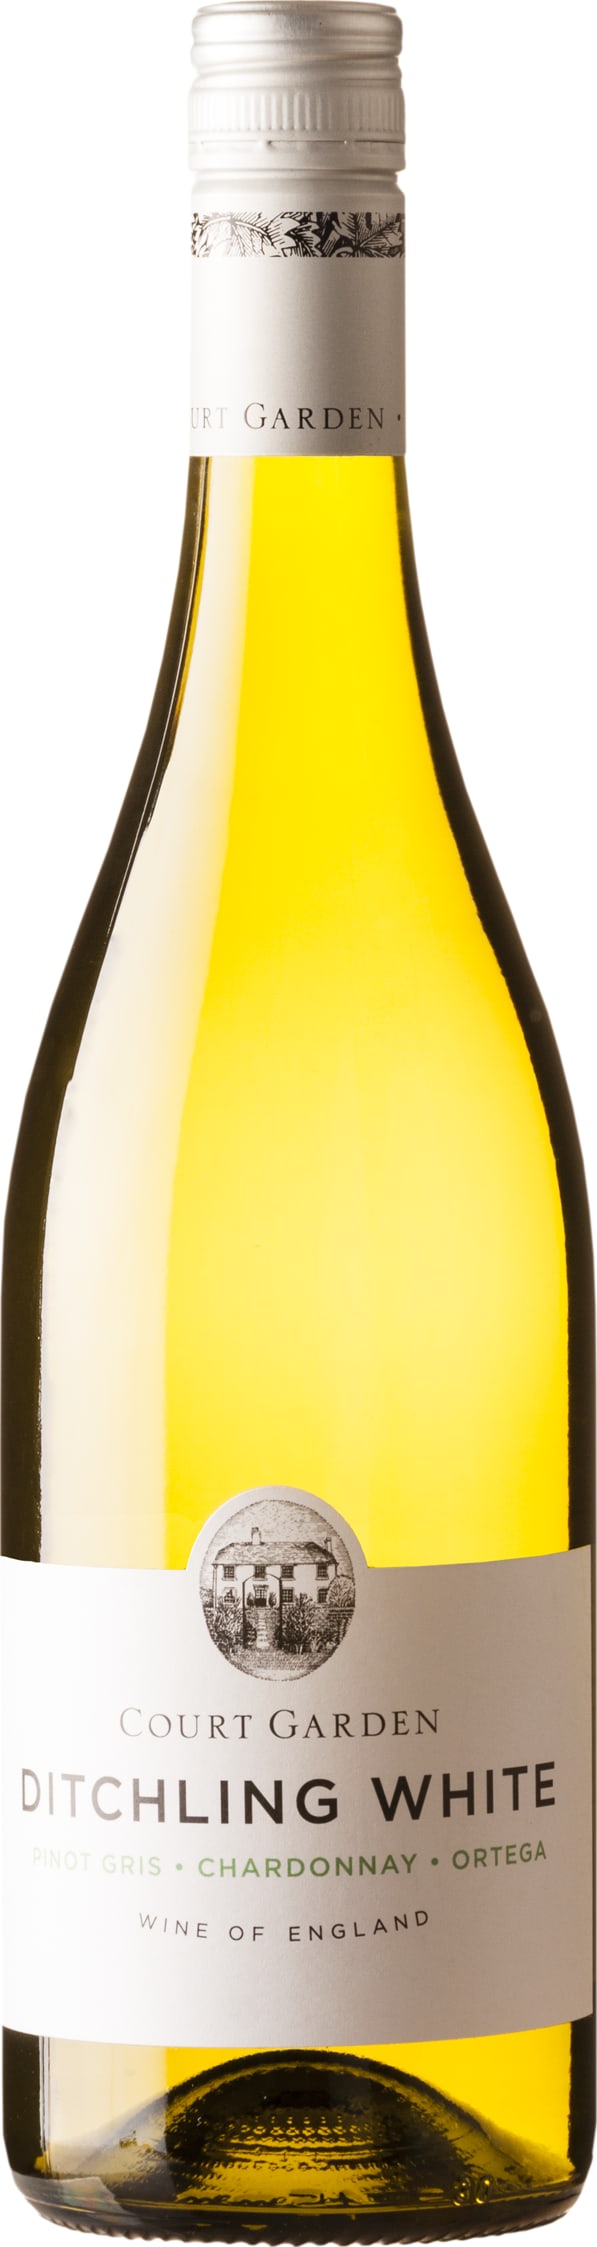 Ditchling Ditchling White 2021 75cl - Buy Ditchling Wines from GREAT WINES DIRECT wine shop